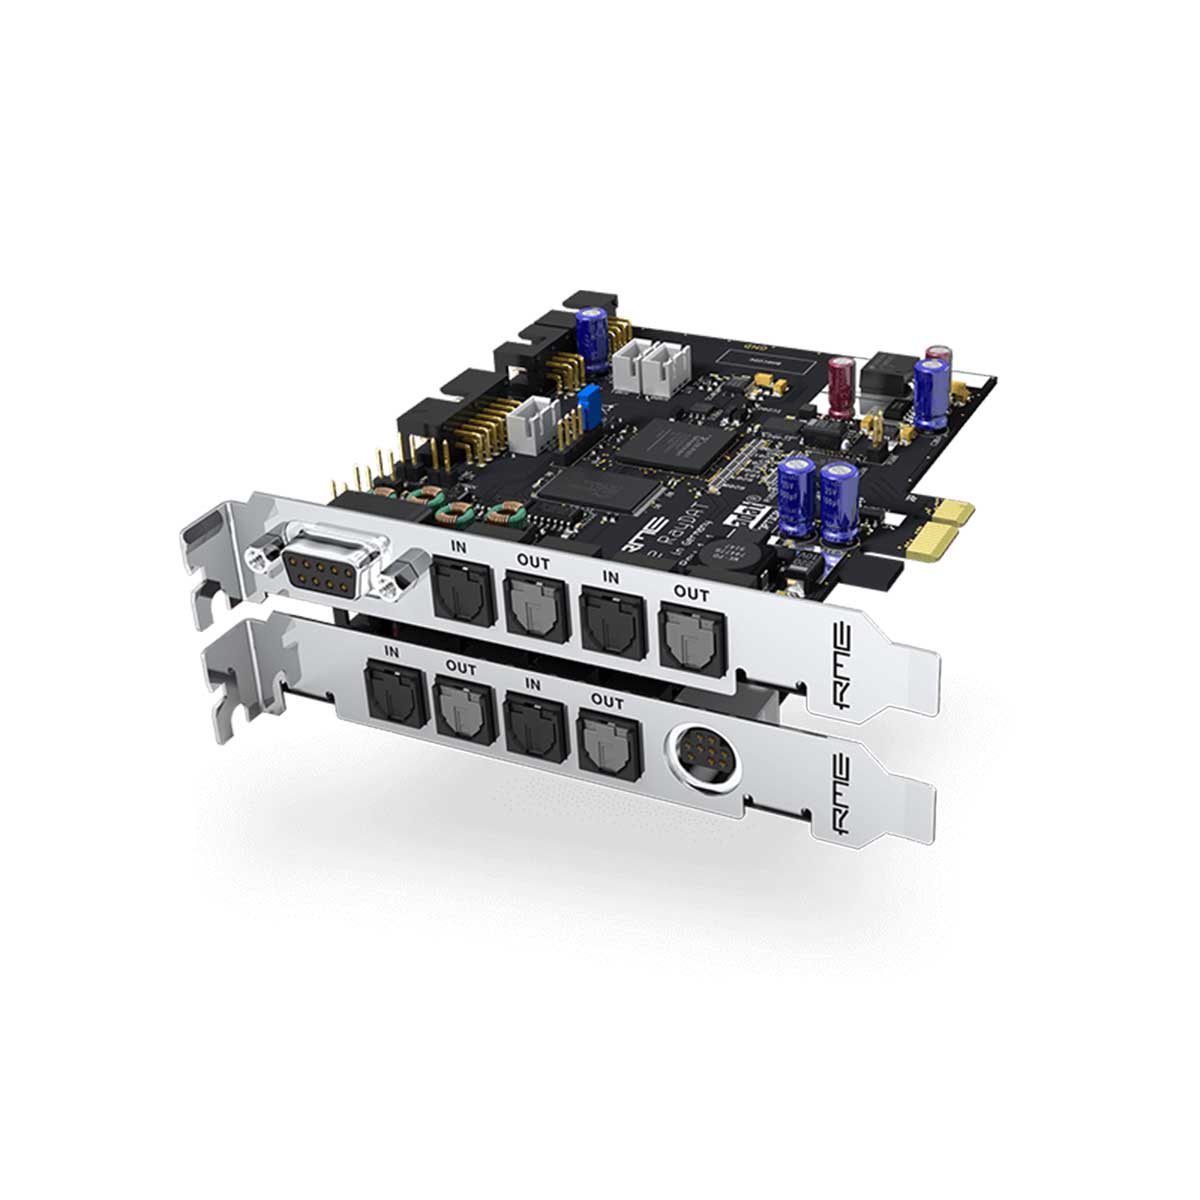 RME HDSPe RayDAT 72-channel PCI Express Audio Interface Card with ADAT, SPDIF and AES/EBU IO